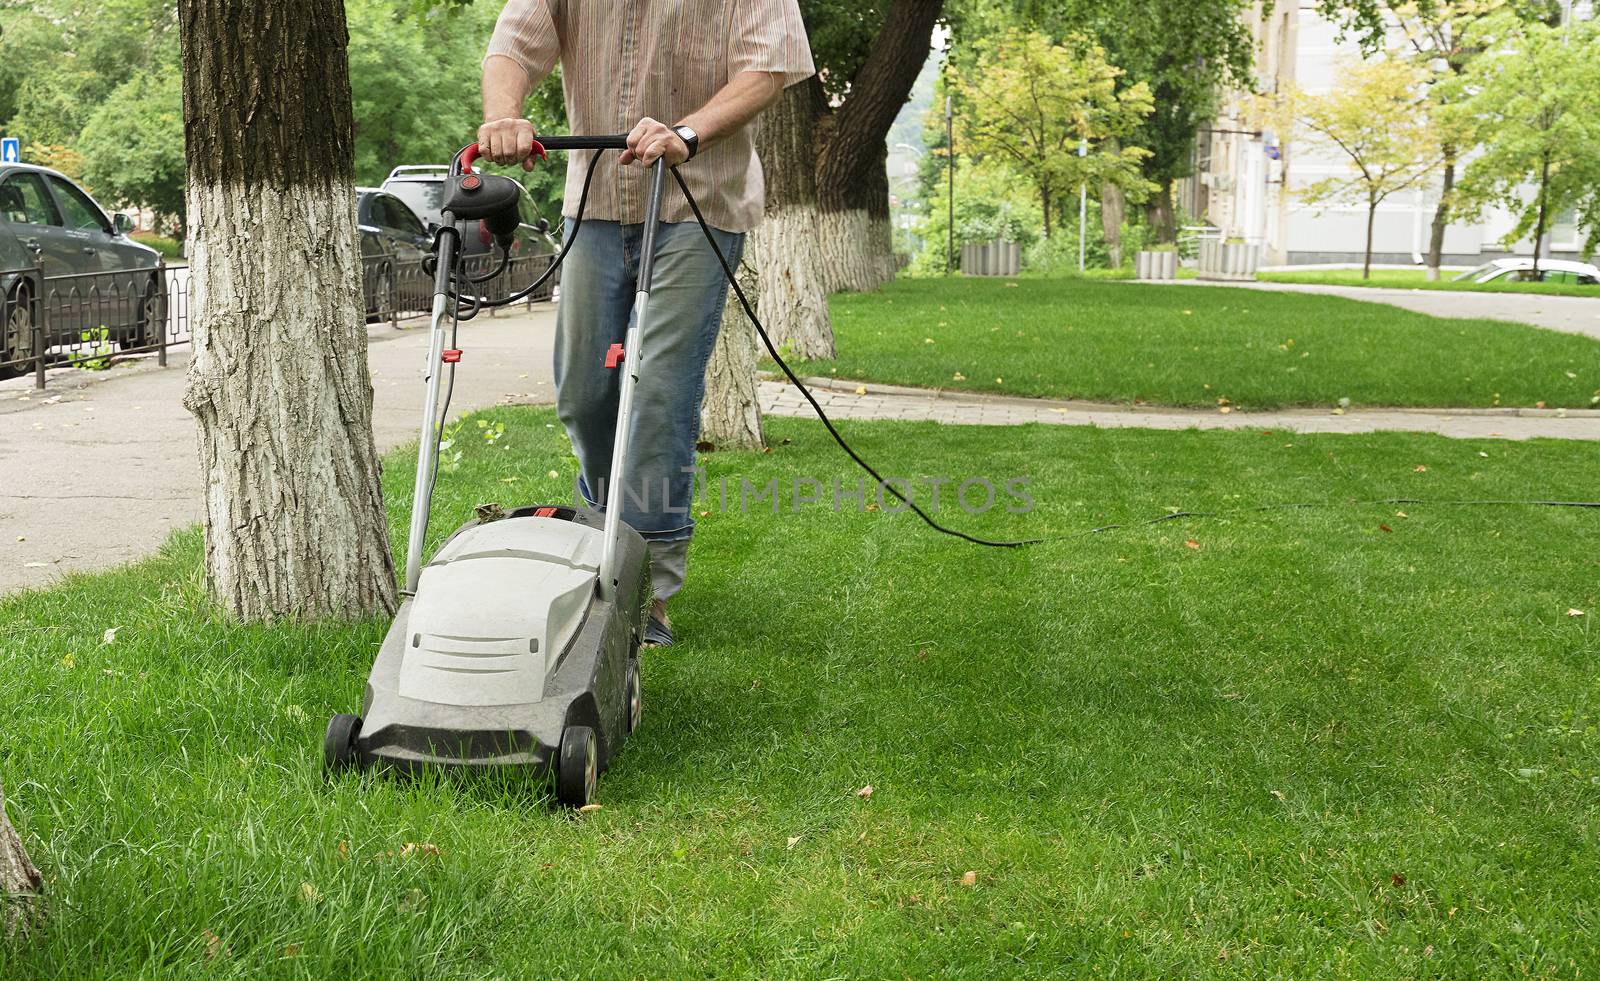 The worker cuts the high grass with an industrial electric lawn mower by Sergii